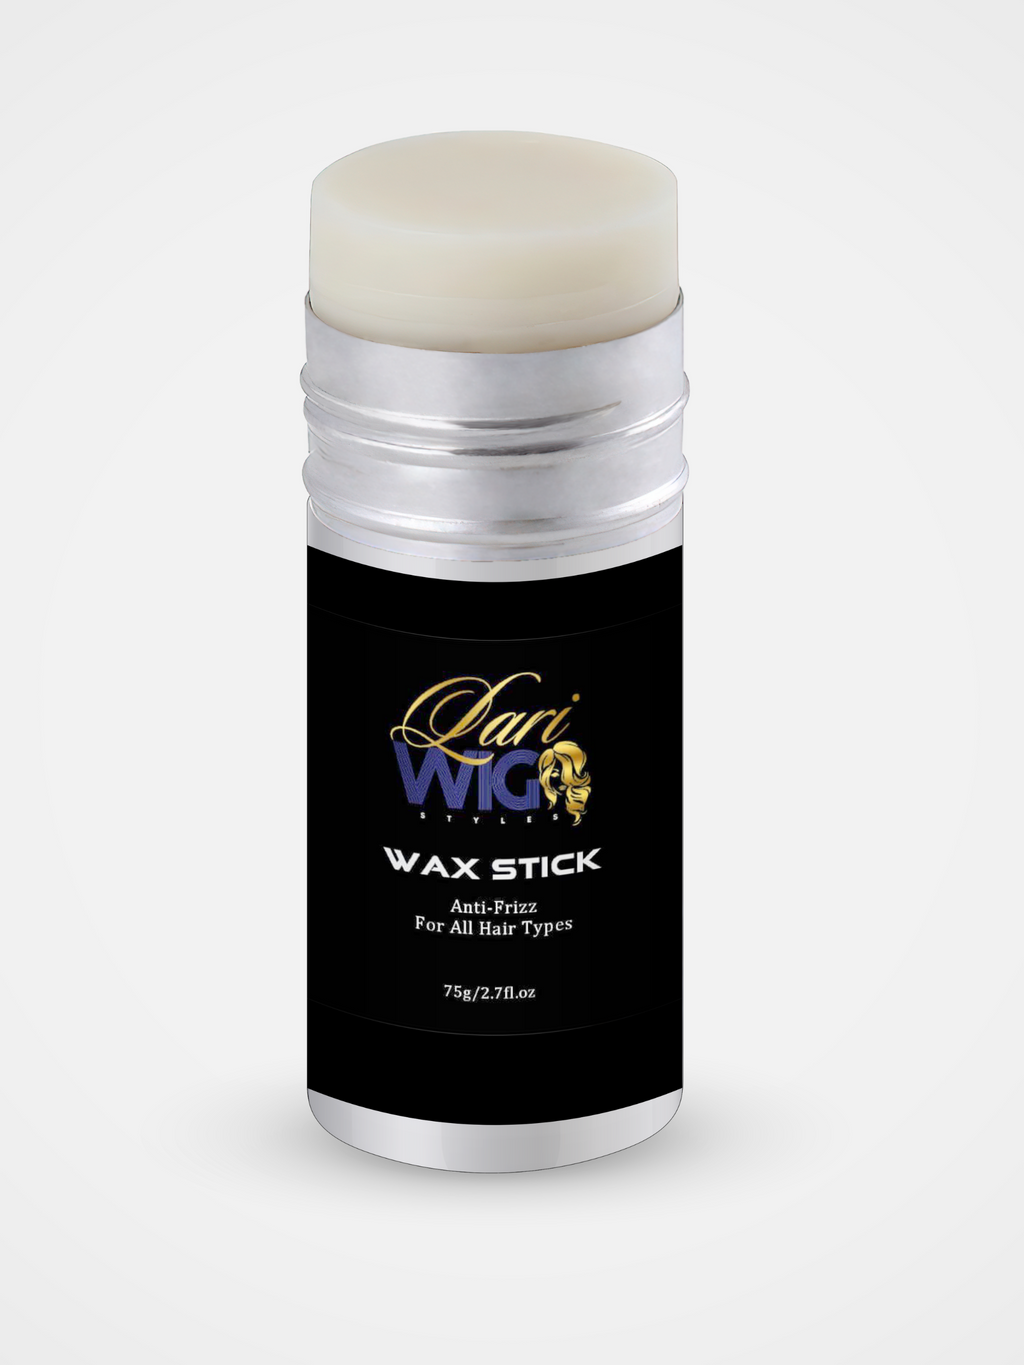 Wax Stick – The Standard Of Style